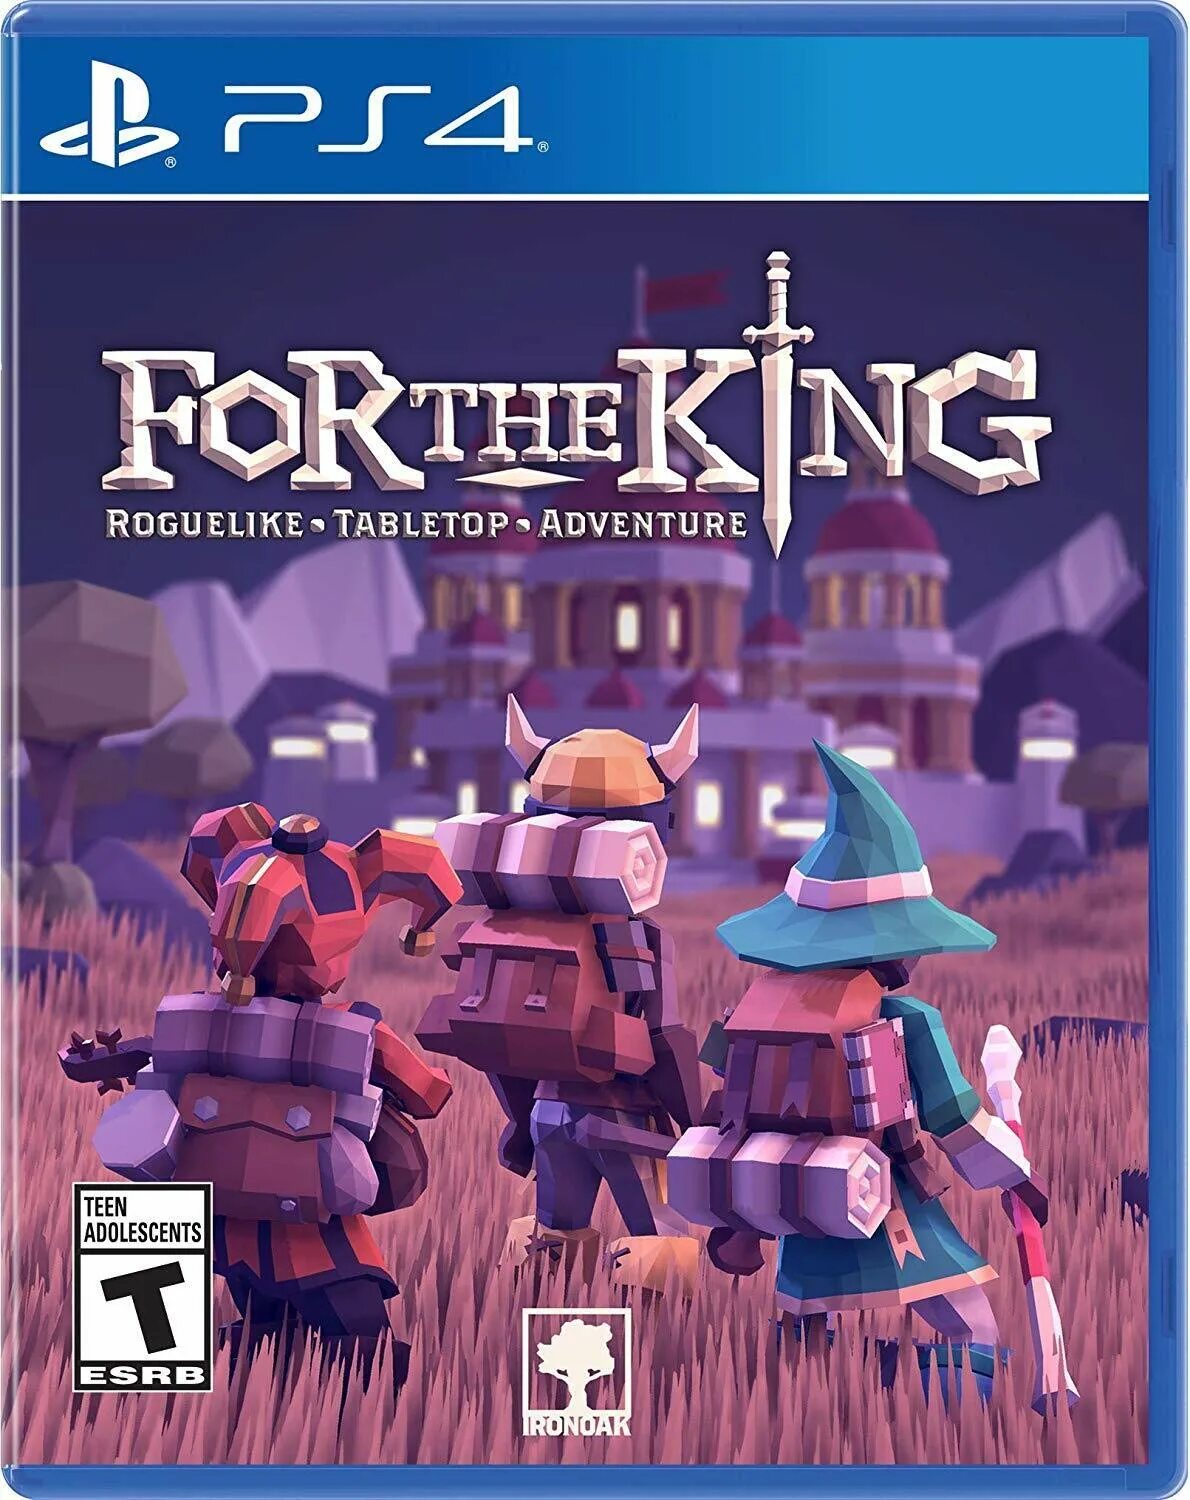 For the King ps4. Игры 12+. PS-4 for the King Roguelike Tabletop Adventure. МАНКЕЙ Кинг пс4. King ps4